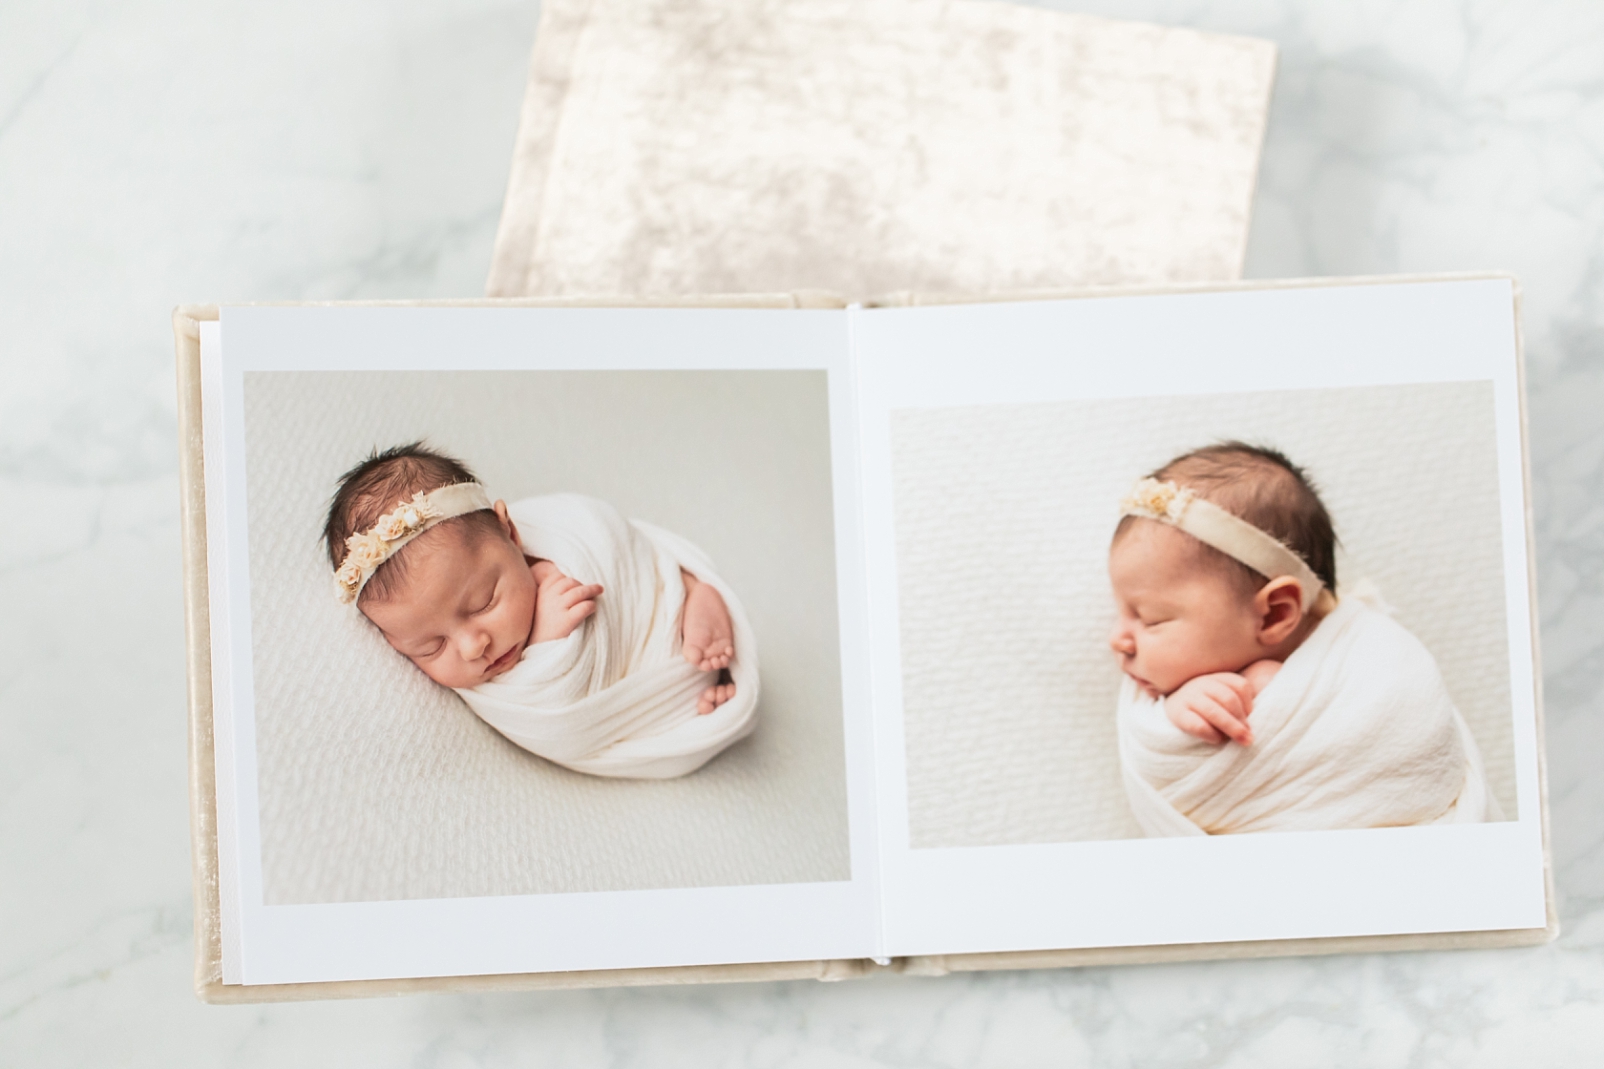 Velvet album open with images of a newborn baby wrapped in a white fabric so that photographs keep our memories